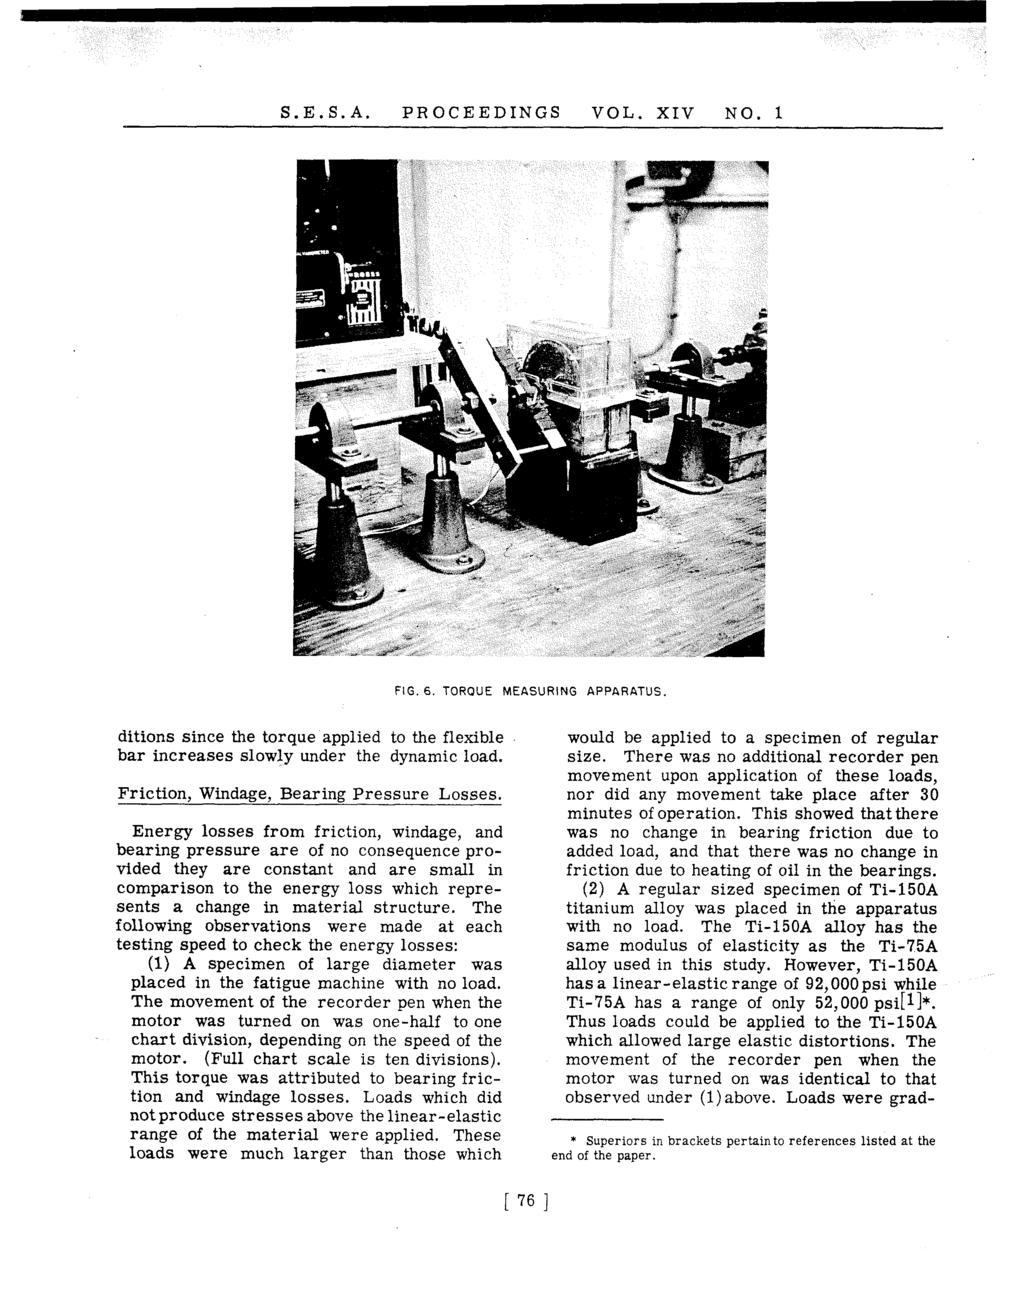 S.E.S.A. PROCEEDINGS VOL. XIV NO. 1 FIG. 6. TORQUE MEASURING APPARATUS ditions since the torque applied to the flexible bar increases slowly under the dynamic load.